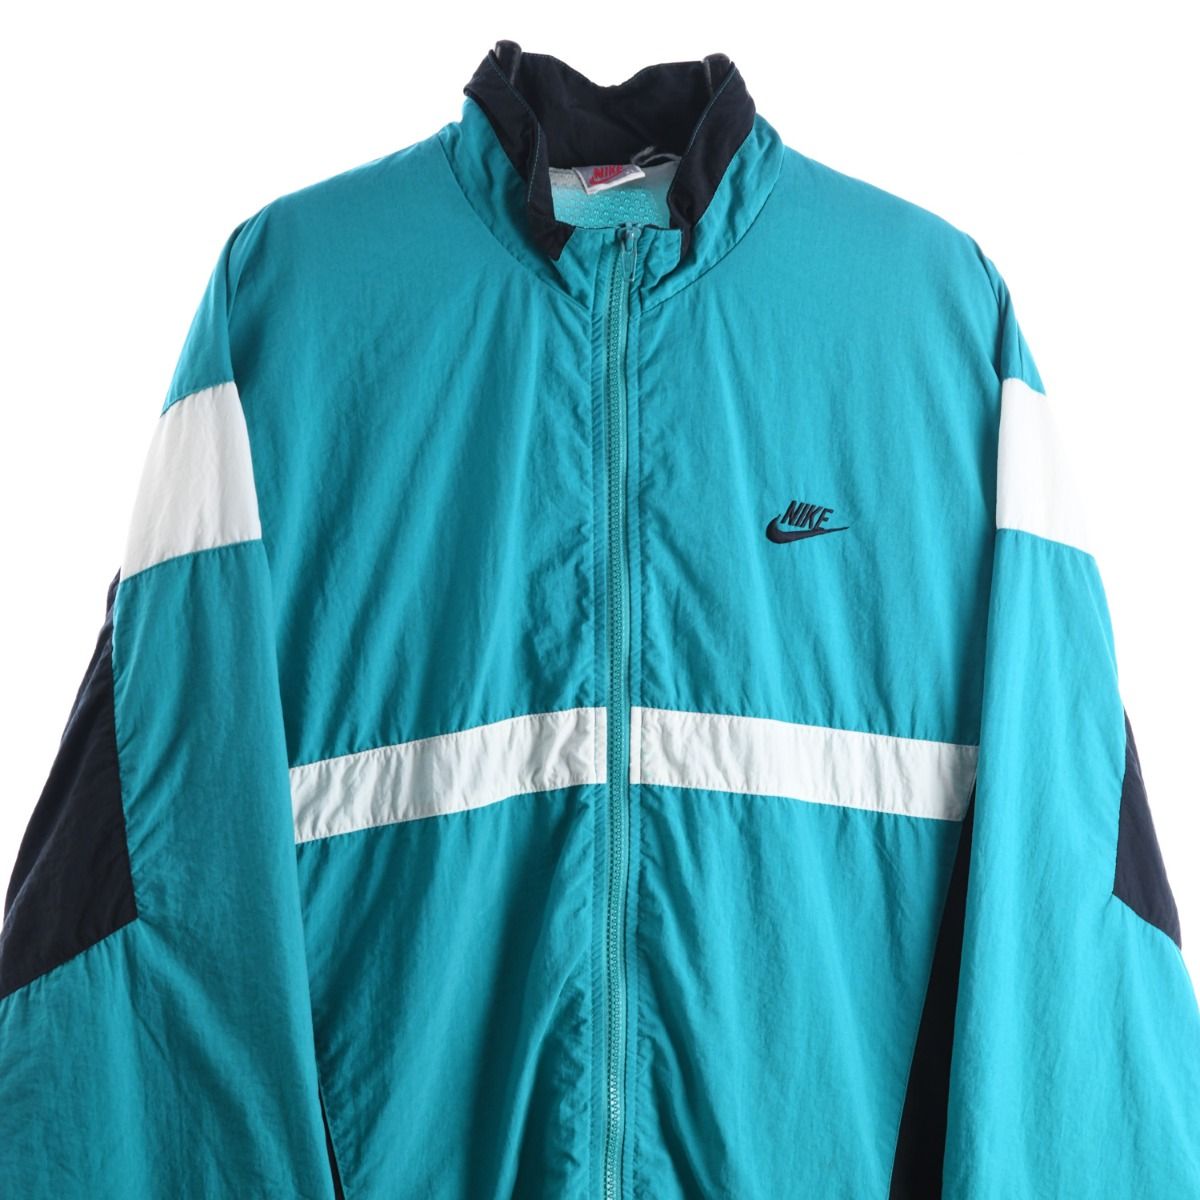 Nike Early 1990s Teal Shell Jacket